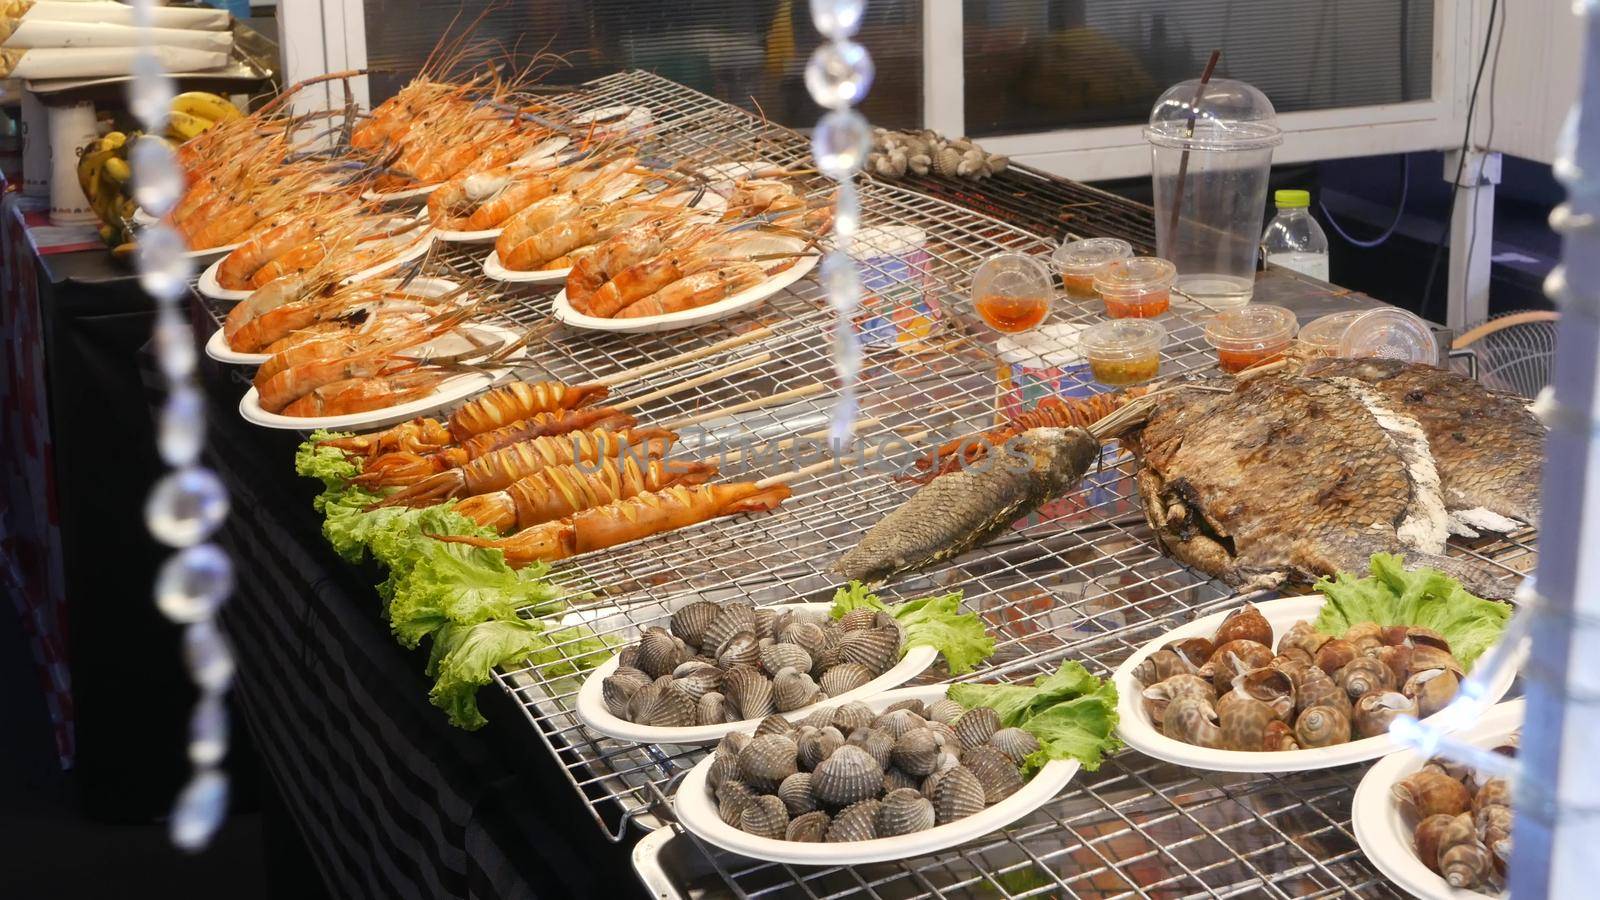 National Asian Exotic ready to eat seafood at night street market food court in Thailand. Delicious Grilled Prawns or Shrimps and other snacks. by DogoraSun